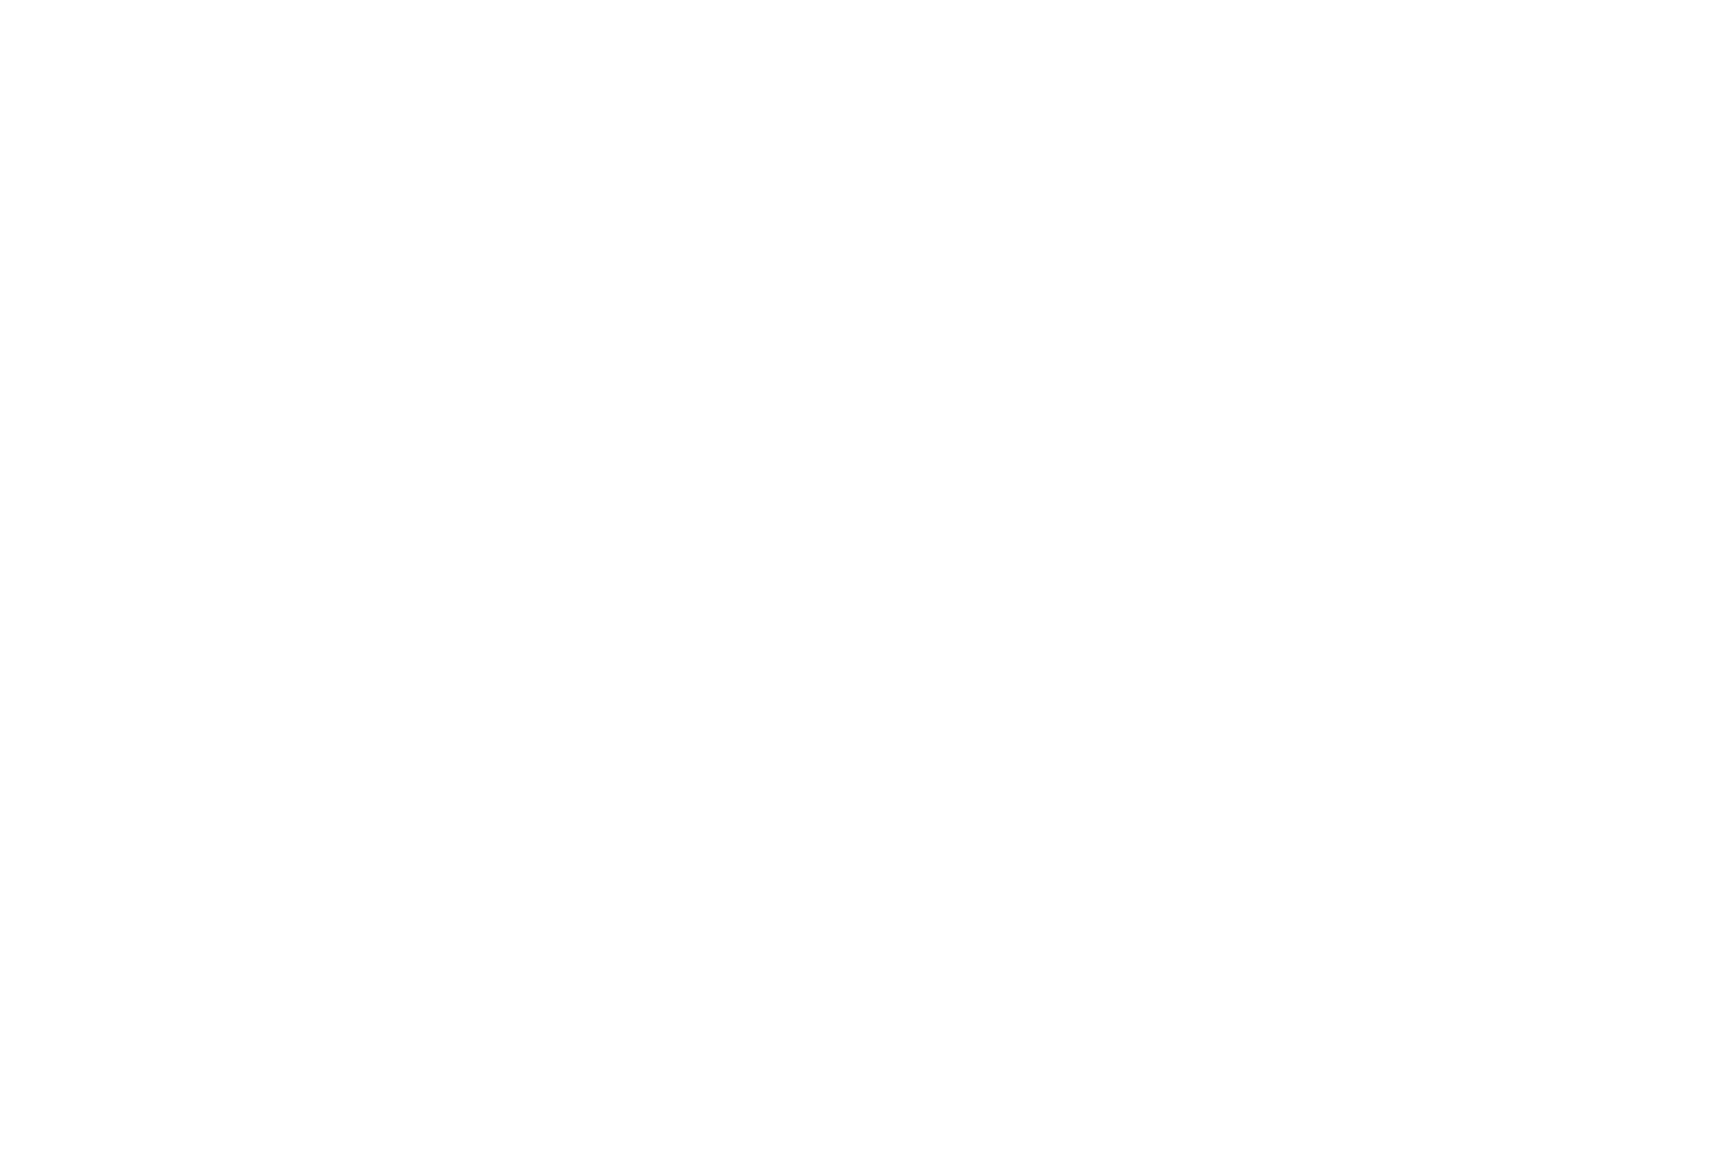 OFFICIAL SELECTION - Flickers Rhode Island International Film Festival - 2023.png